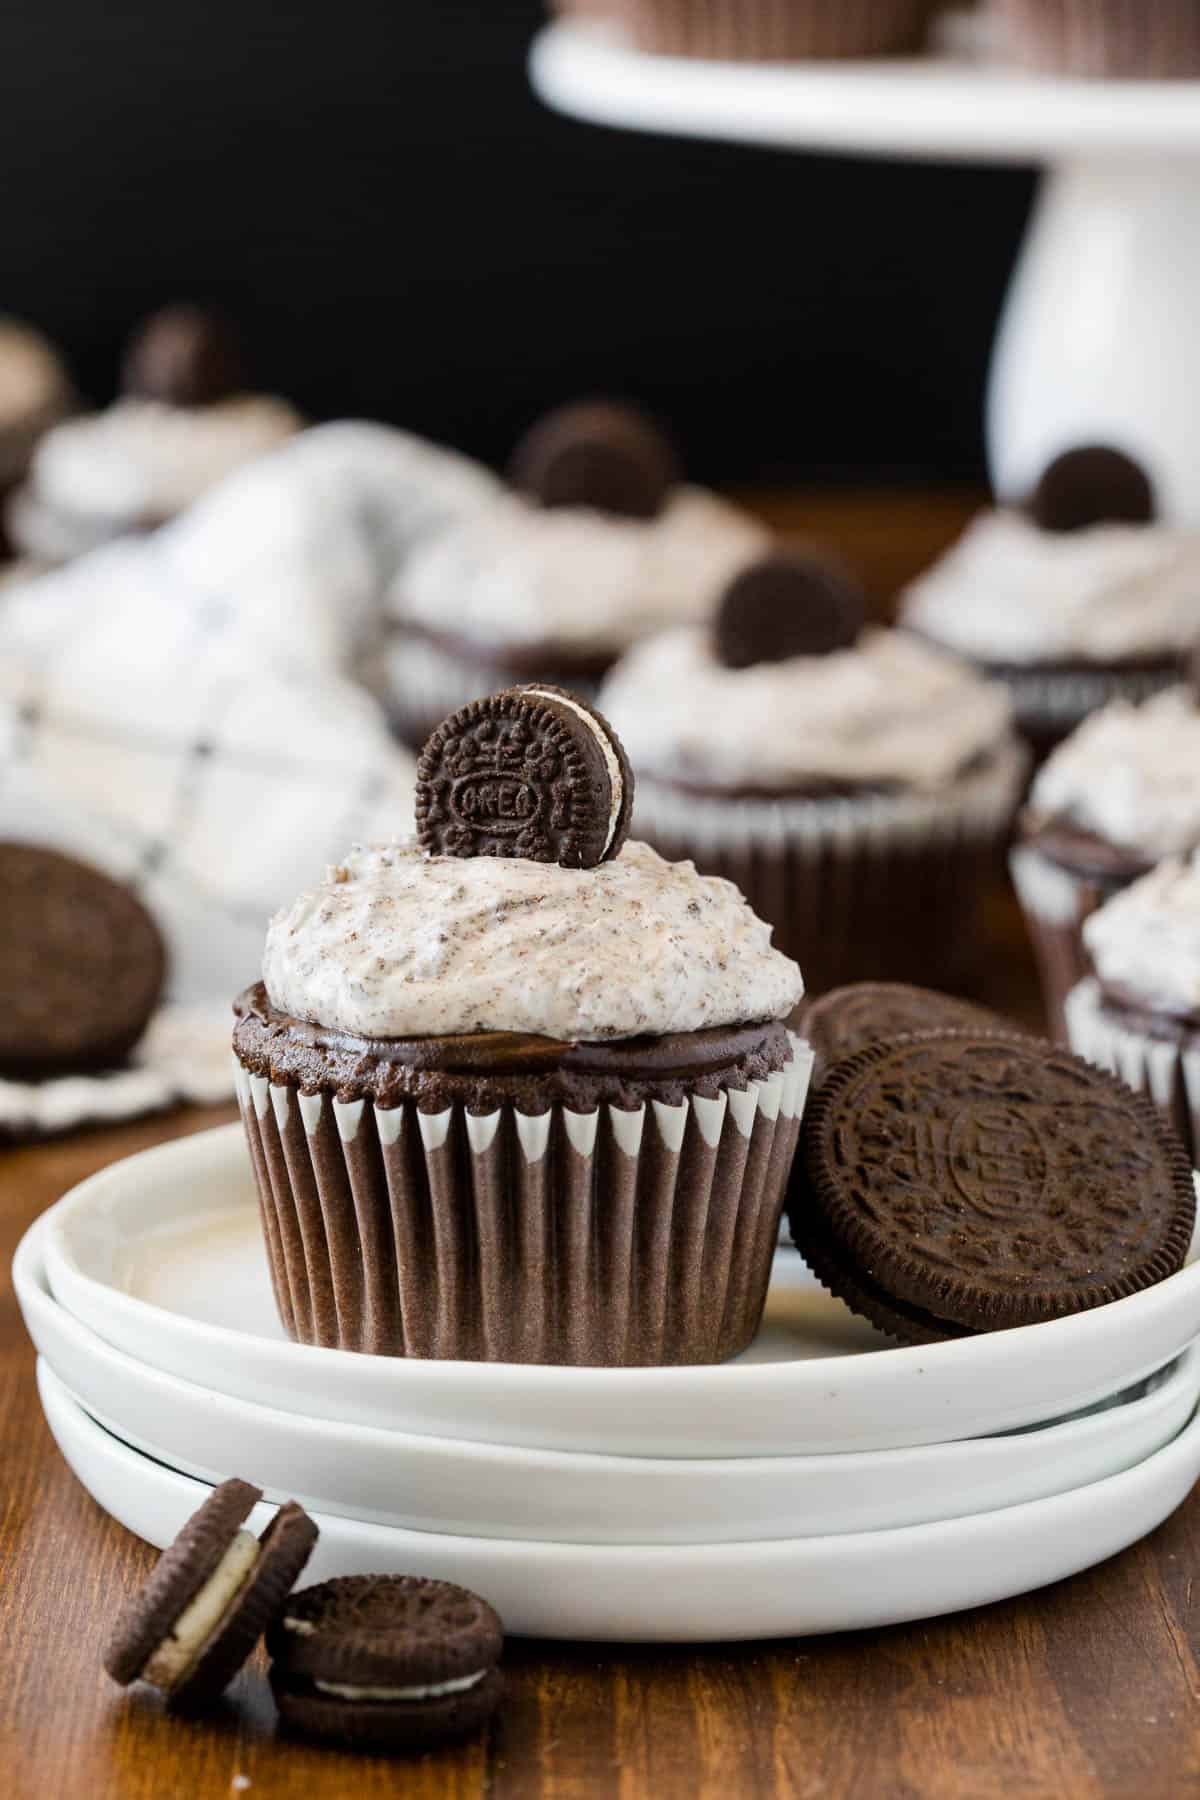 Oreo Cupcakes - Chocolate Cupcakes topped with a rich chocolate ganache and cream cheese & Oreo frosting.